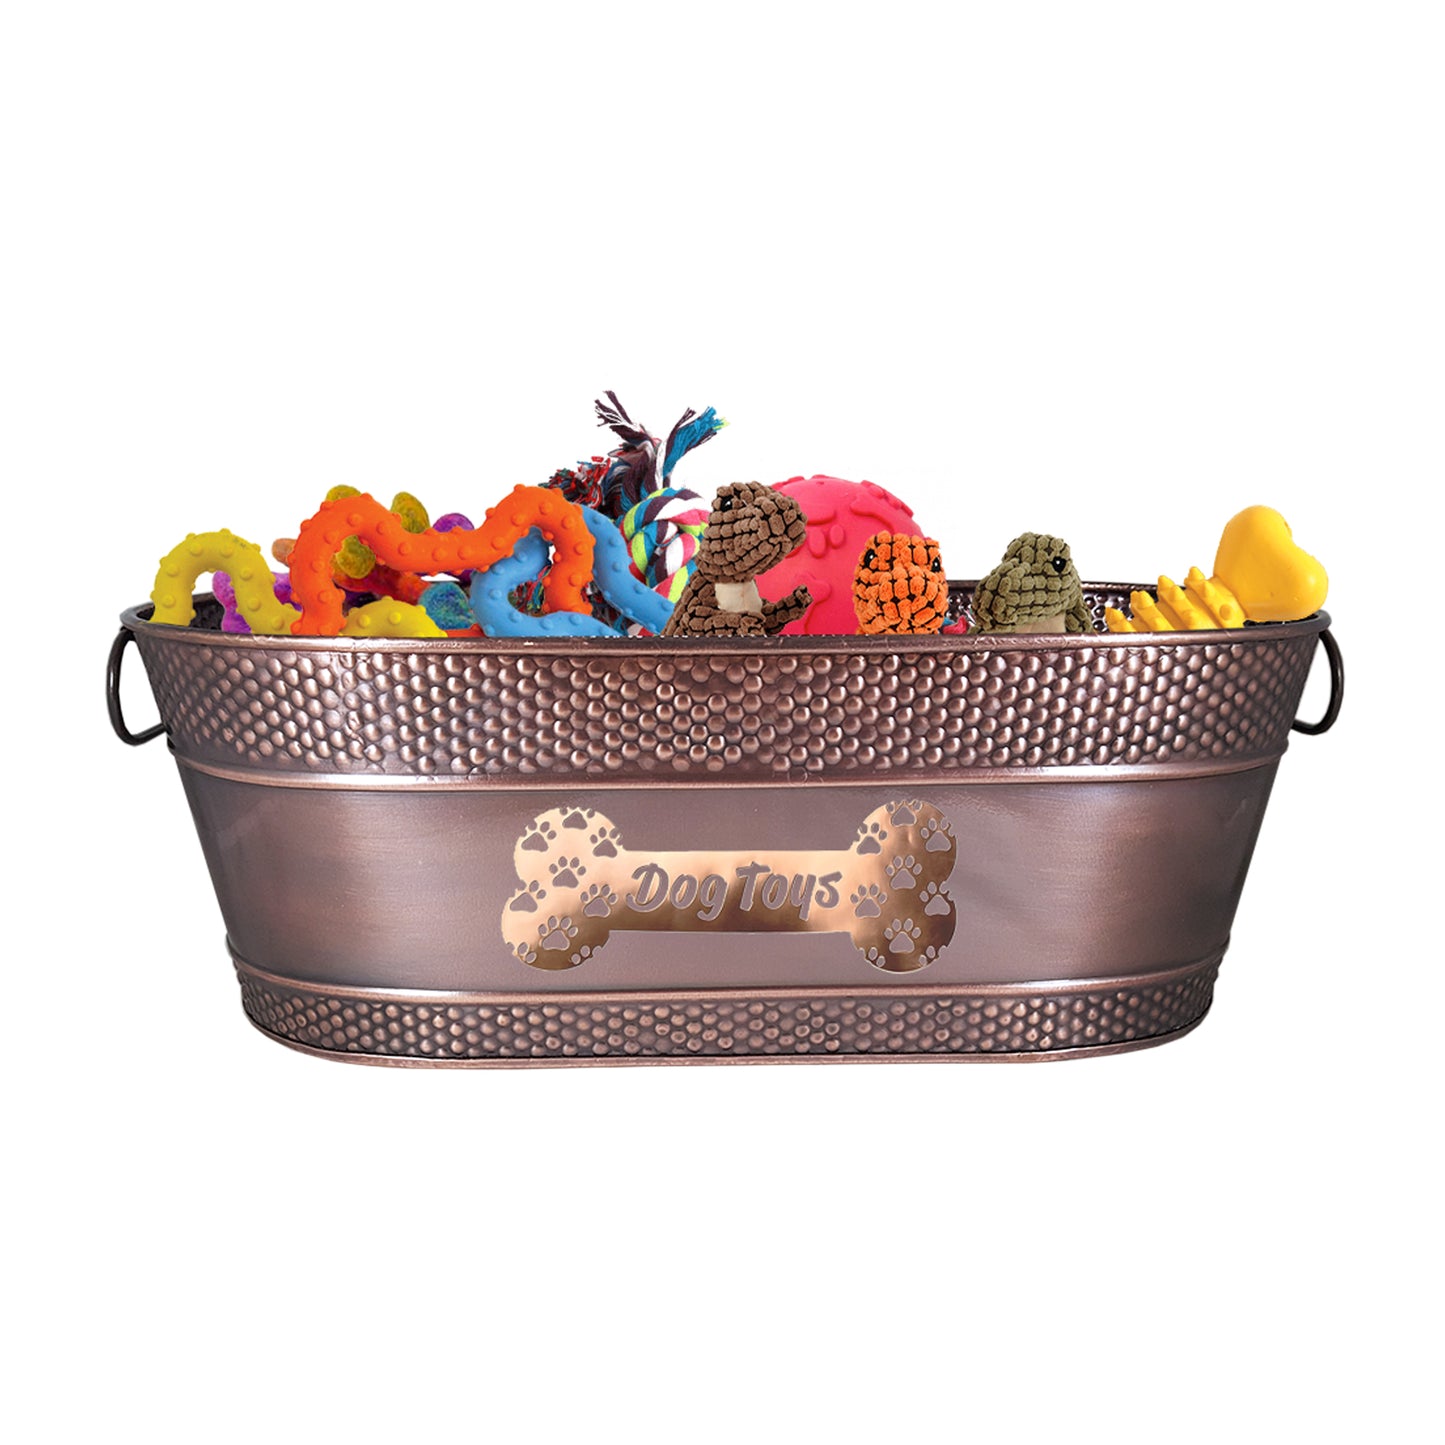 Metal bin or basket to hold dog toys, treats, and bones.  Glossy finish with antique copper color to match home decor in the living room or the bedroom.  Easily accessible for the dog to get the dog toys.